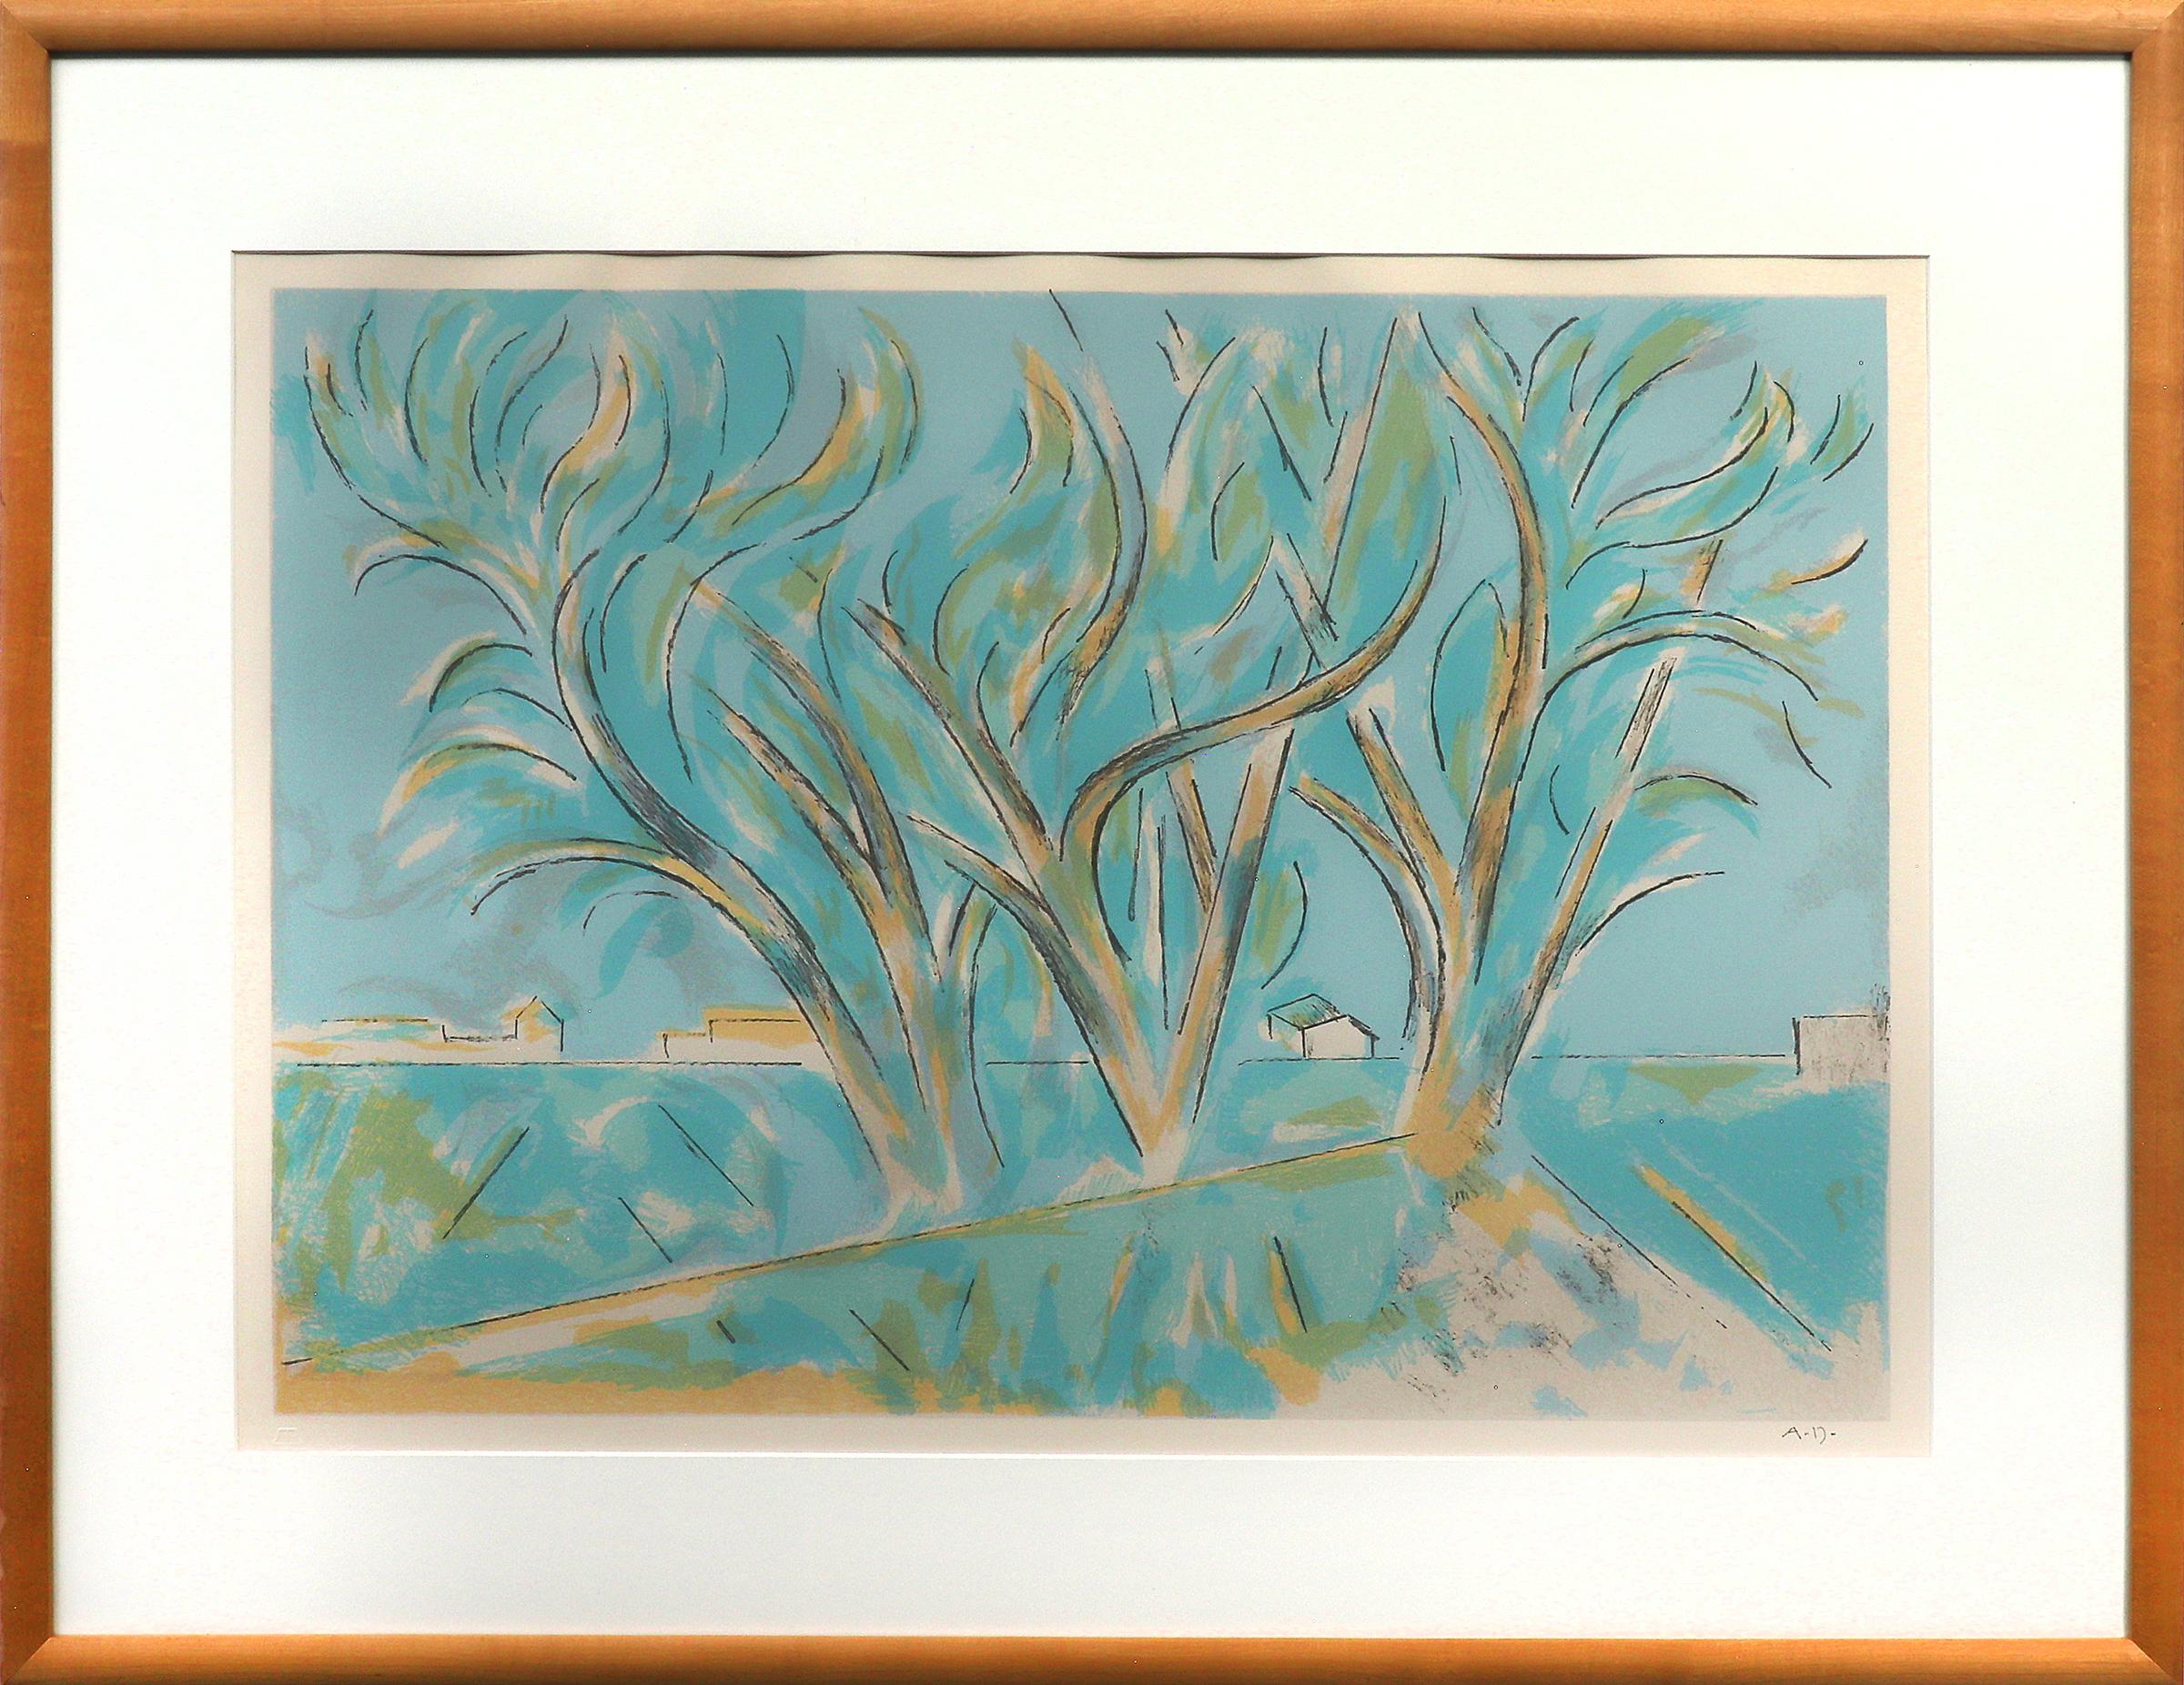 Andrew Michael Dasburg Landscape Print - Trees in Ranchitos II, New Mexico, 1970s Color Lithograph Landscape with Trees